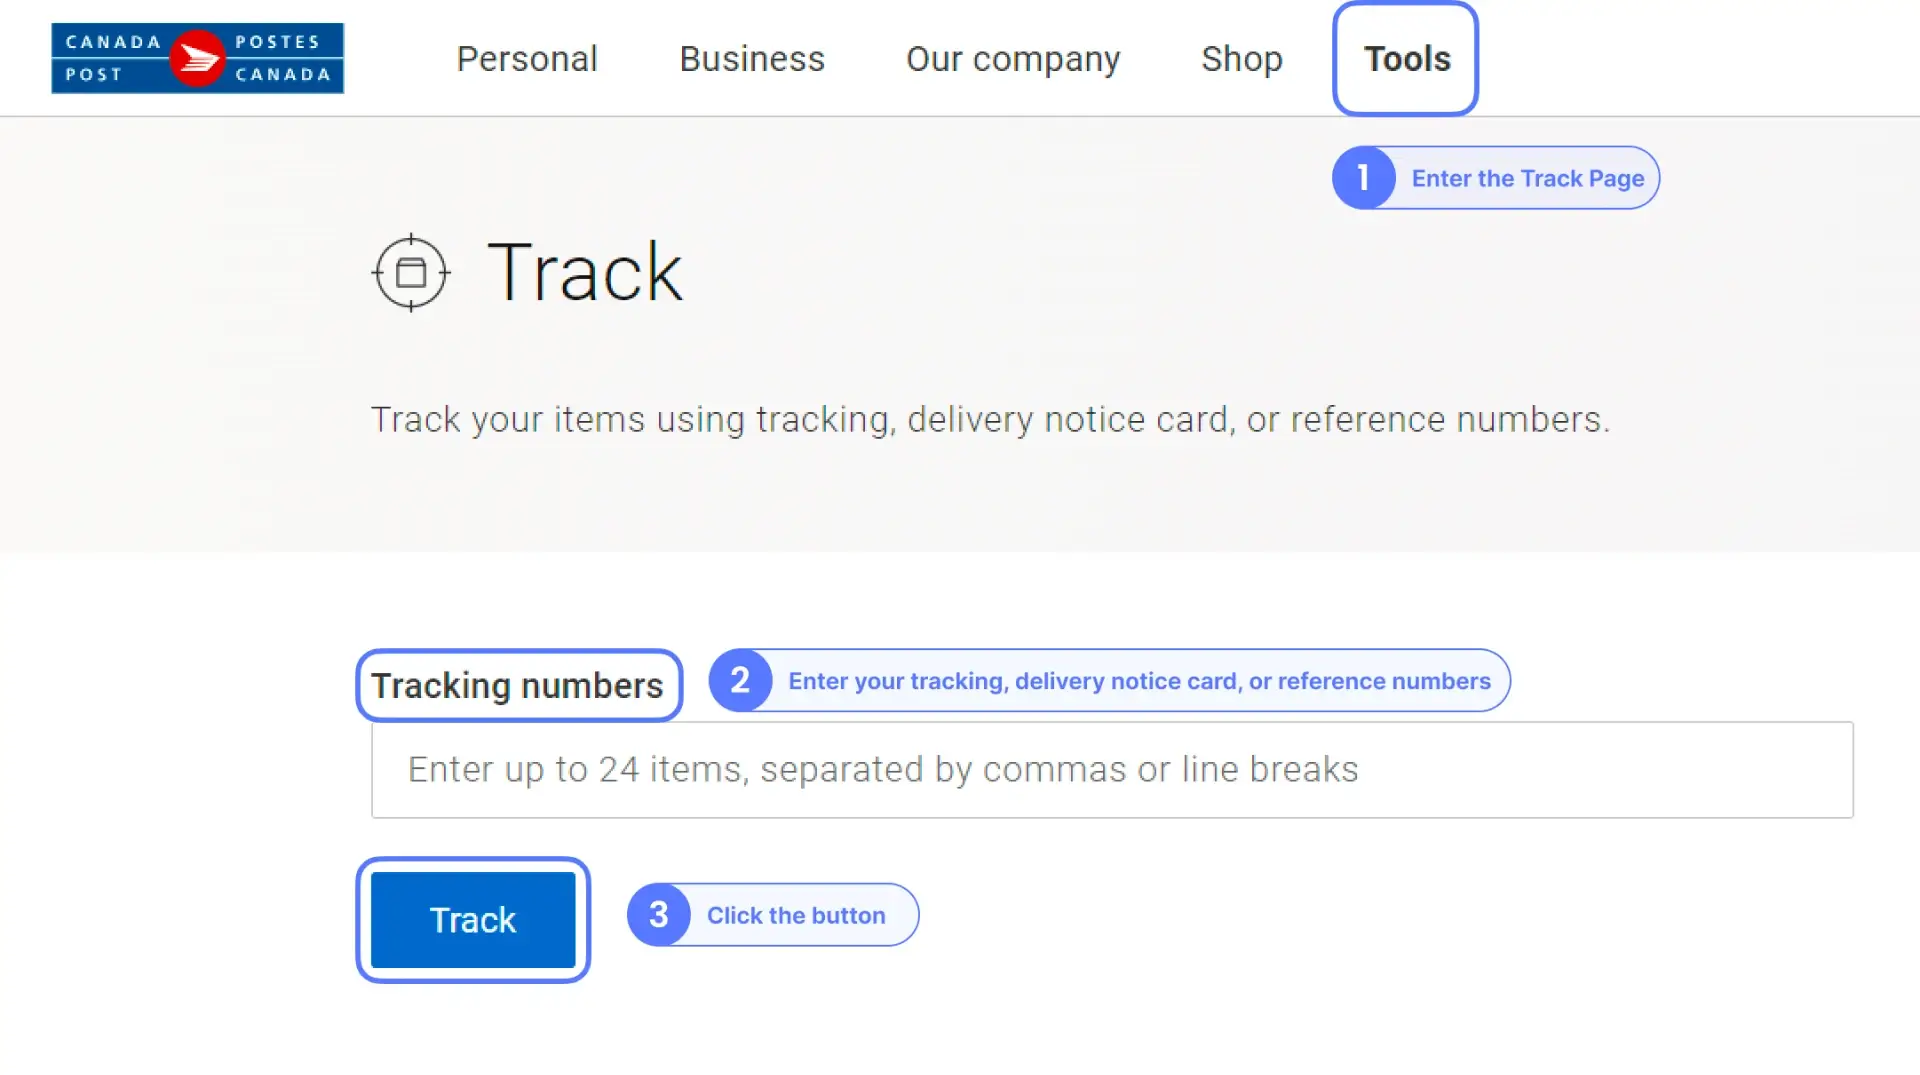 Canada Post Tracking. Learn how to find your tracking number on Canada Post. Enter your tracking number on the Canada Post official website, or track using delivery notice cards or reference numbers.